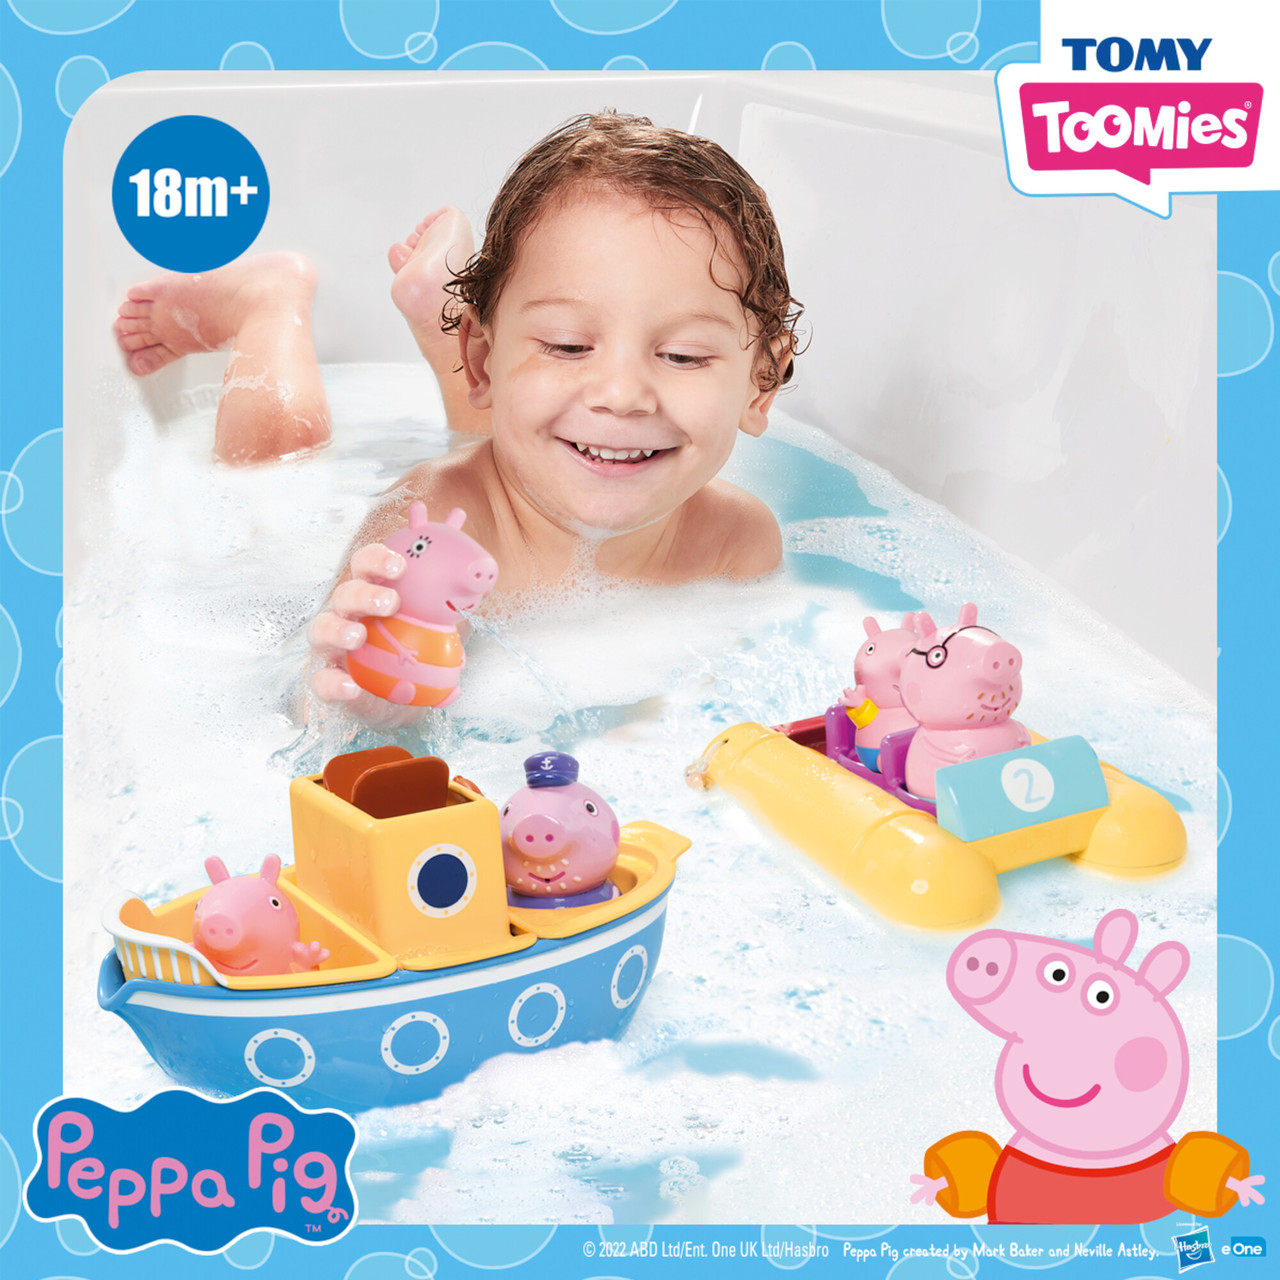 Tomy E73414 Grandpa Pig's Splash & Pour Boat from Toomies – 4-in-1 Bath  Time Peppa Pig Toy with Removable Water Sprinklers and Spinning Paddle